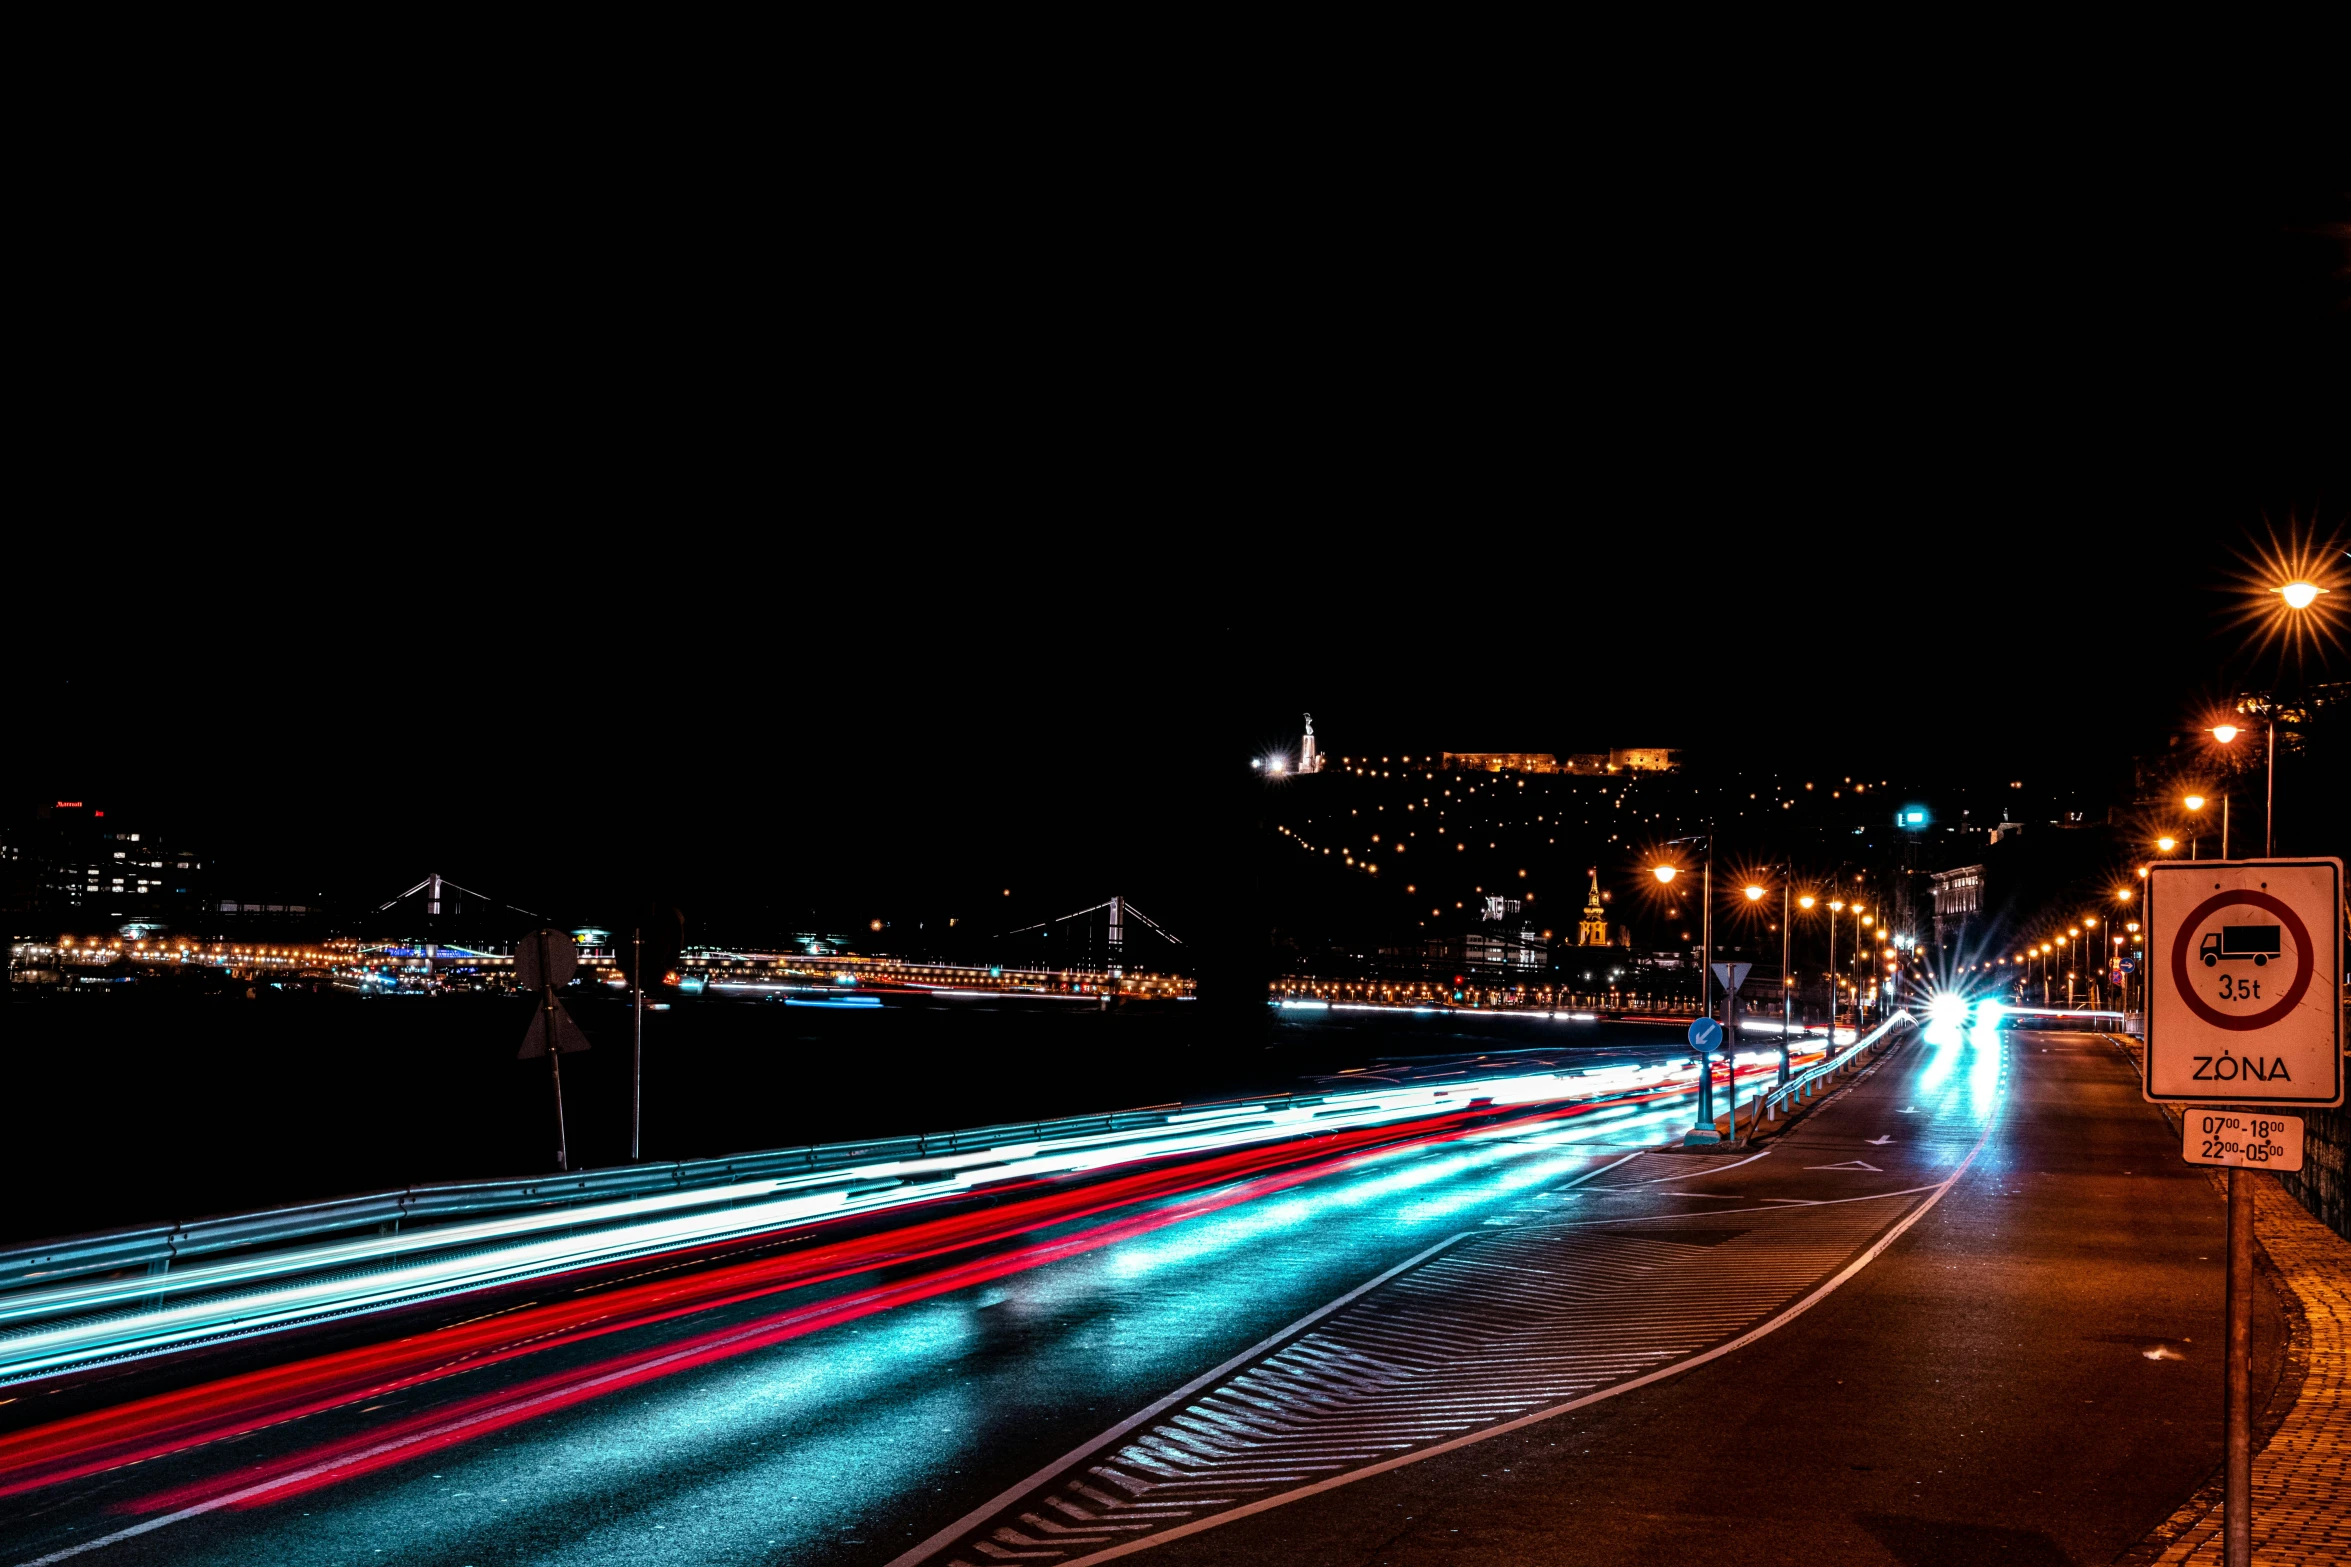 cars move along a city street with their headlights streaking past